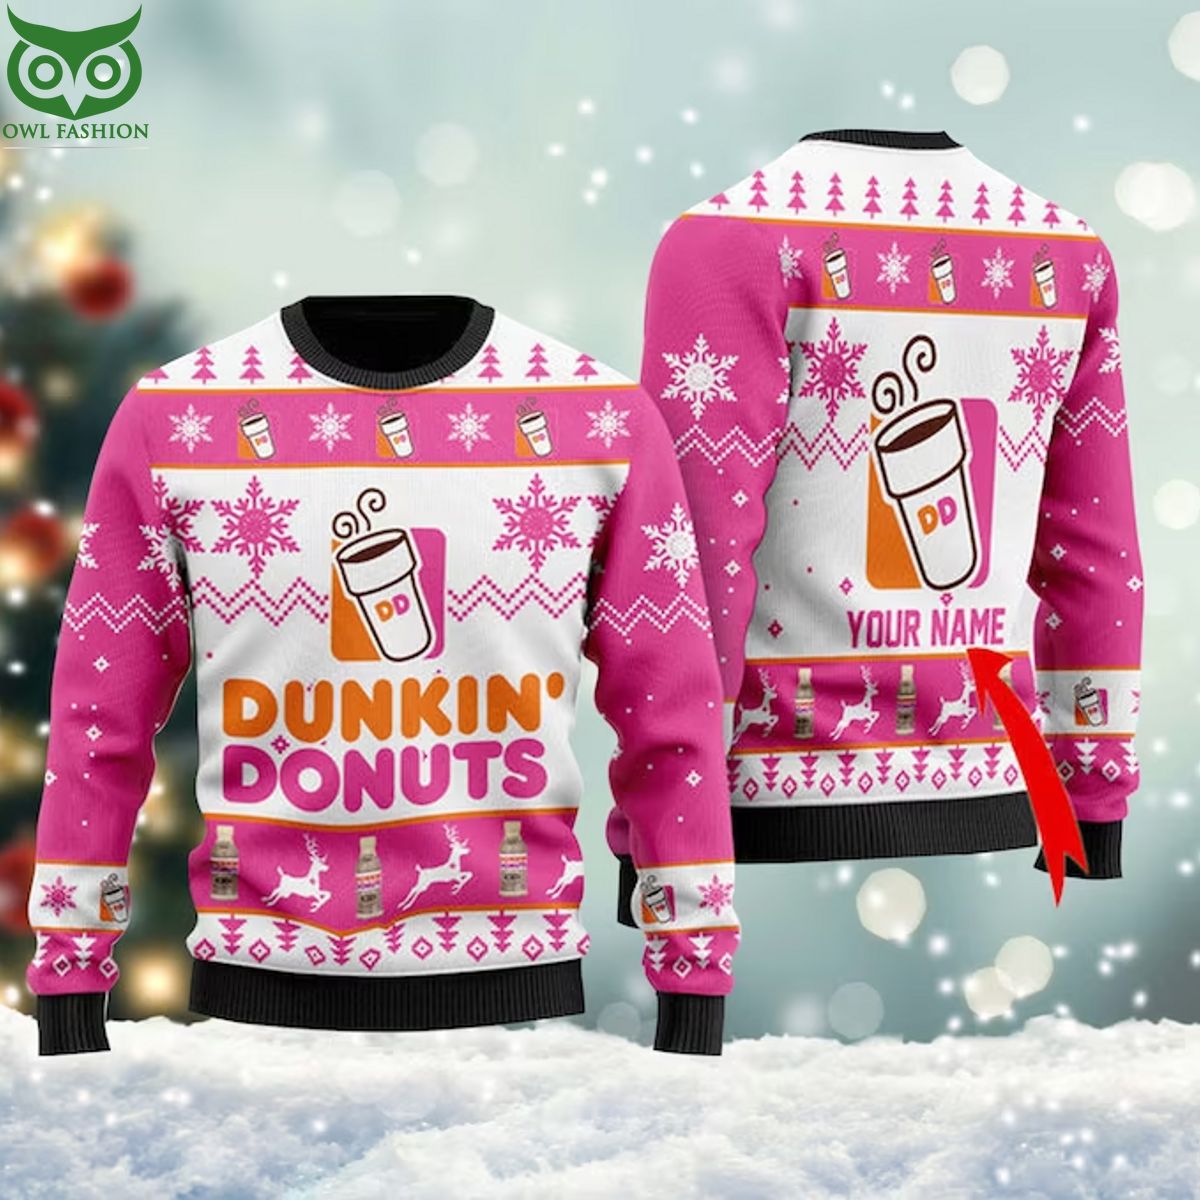 Sweet Pink Dunkin' Donuts Christmas 3D Ugly Sweater Jumper